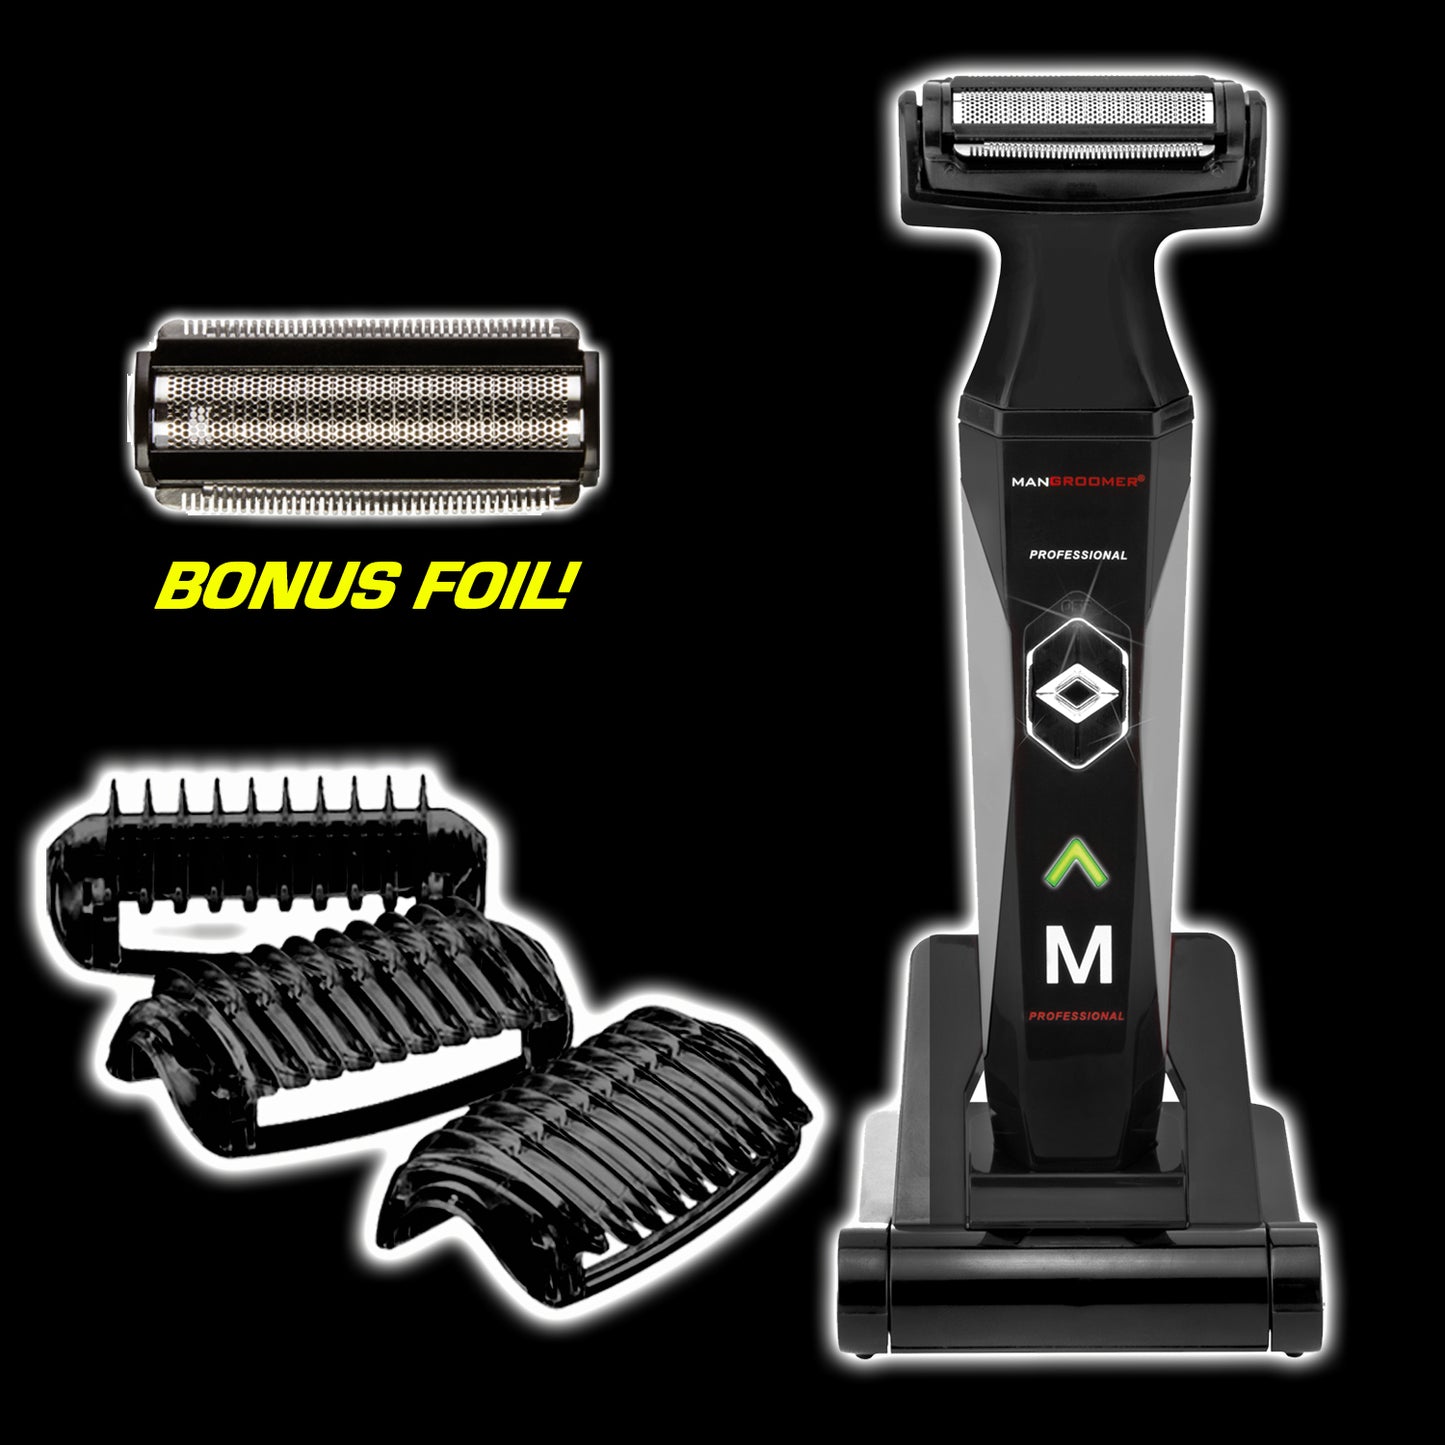 2.0 PROFESSIONAL Body Groomer Wet, Dry PROPIVOT Head, Rubberized grip, Stainless Steel, Rechargeable